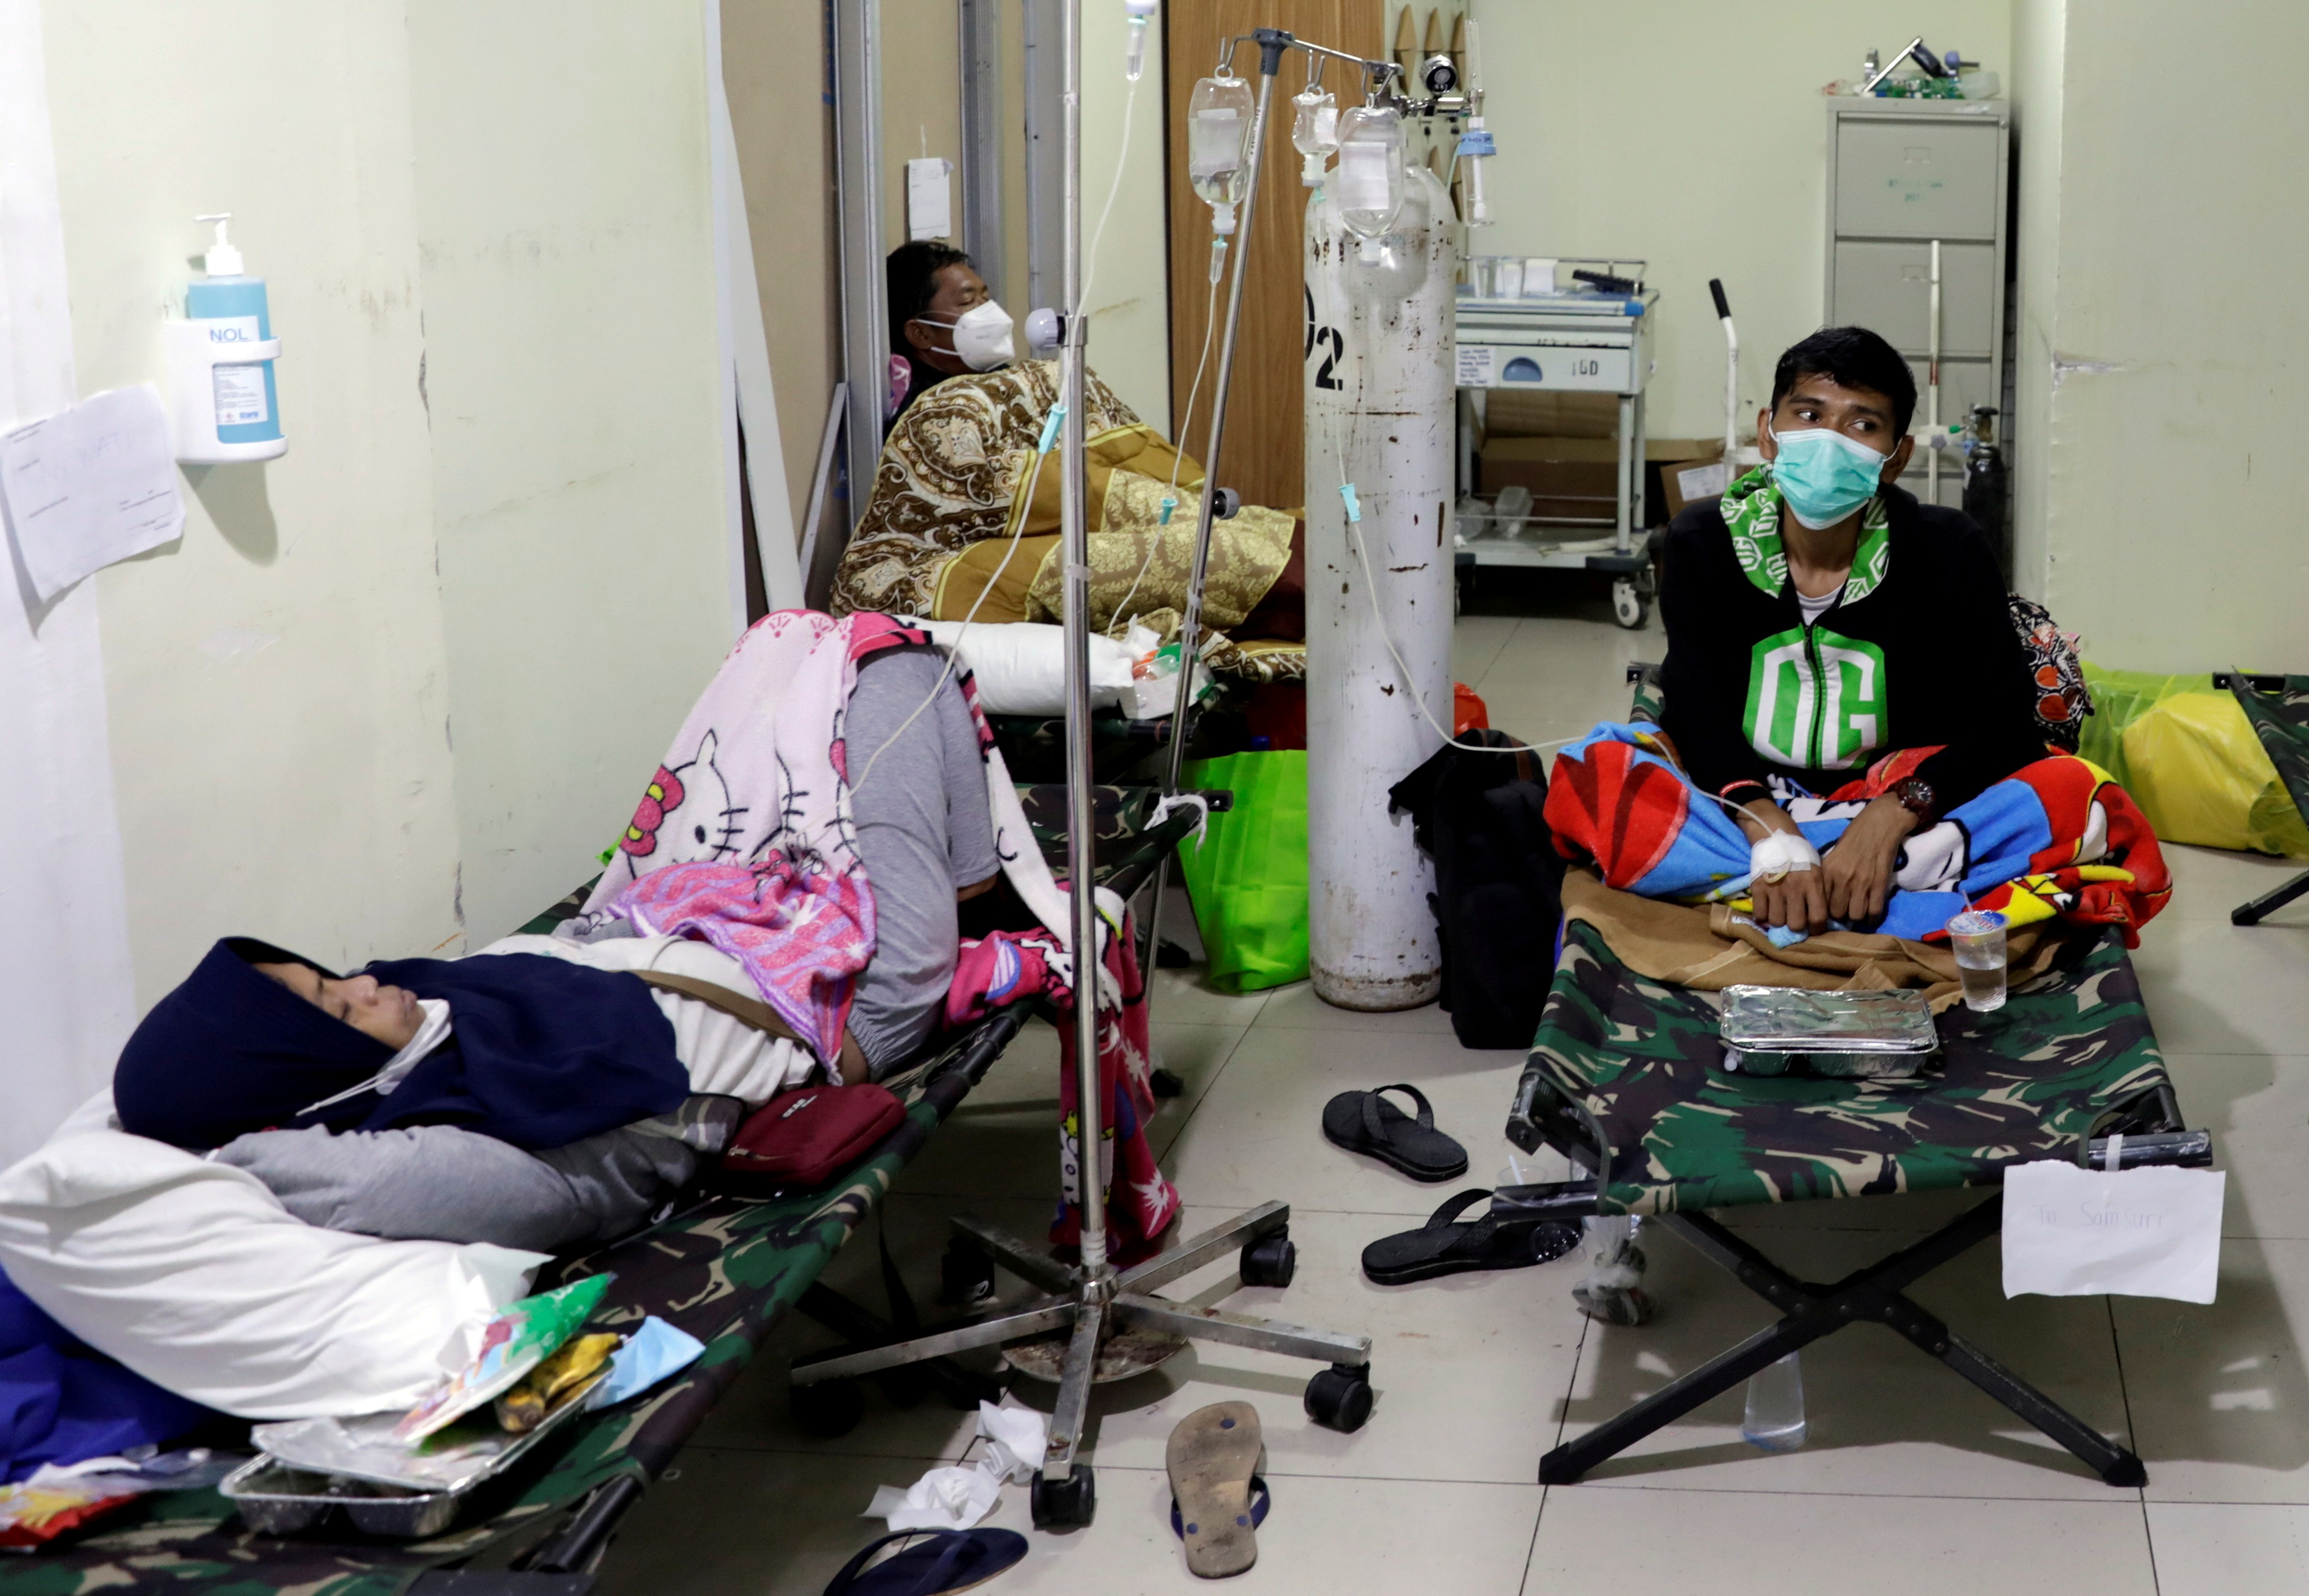 Emergency ward of a government-run hospital gets busy as the cases of COVID-19 surge in Jakarta